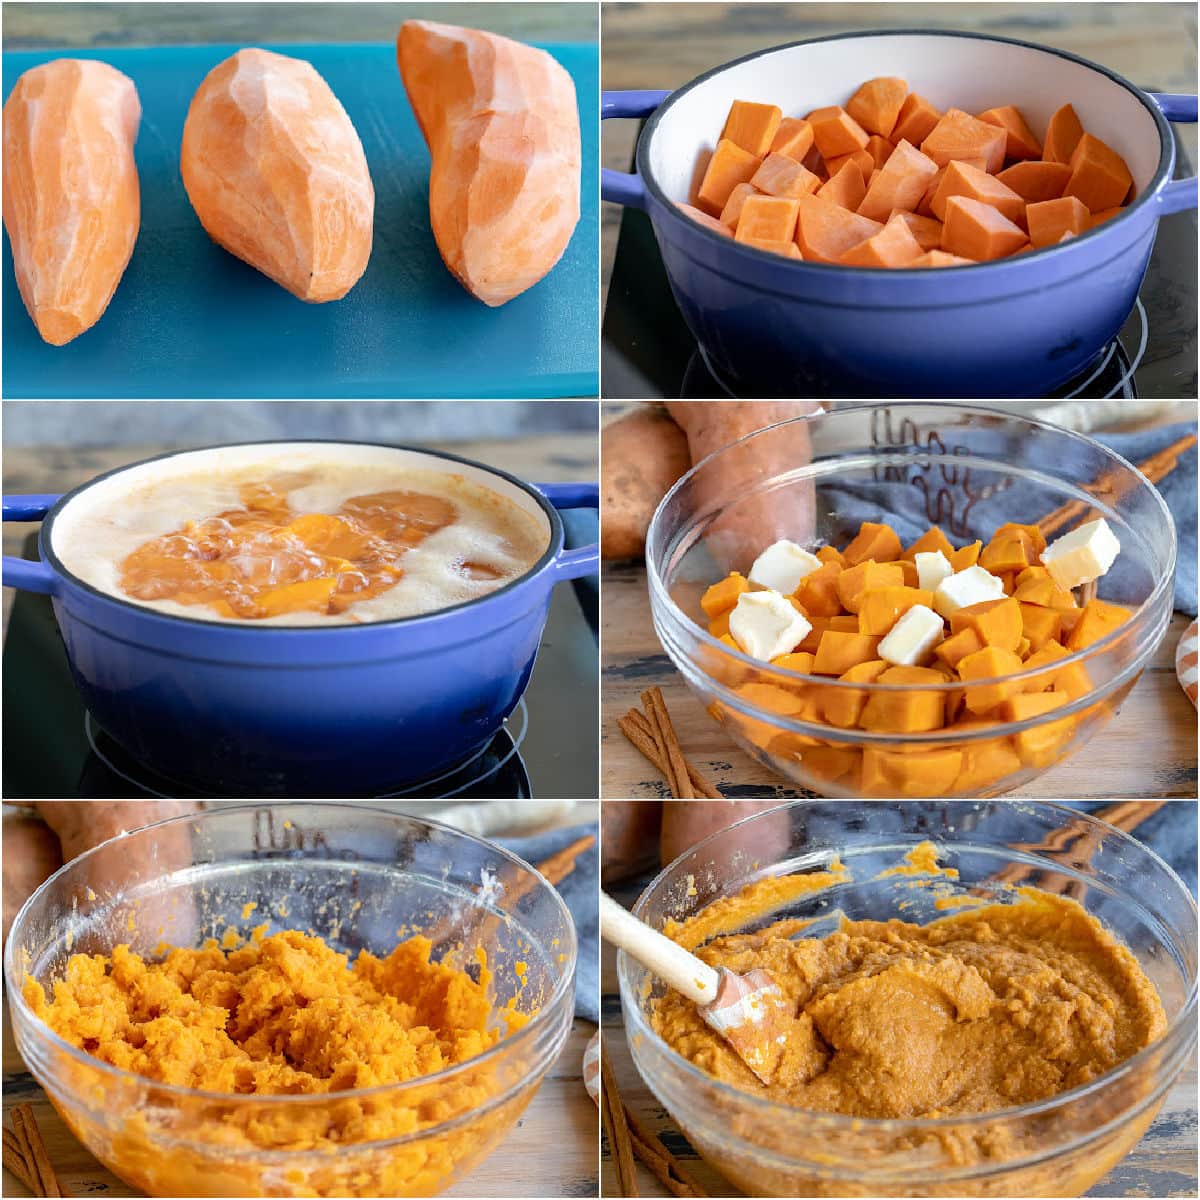 six image collage showing sweet potatoes being boiled and mashed.